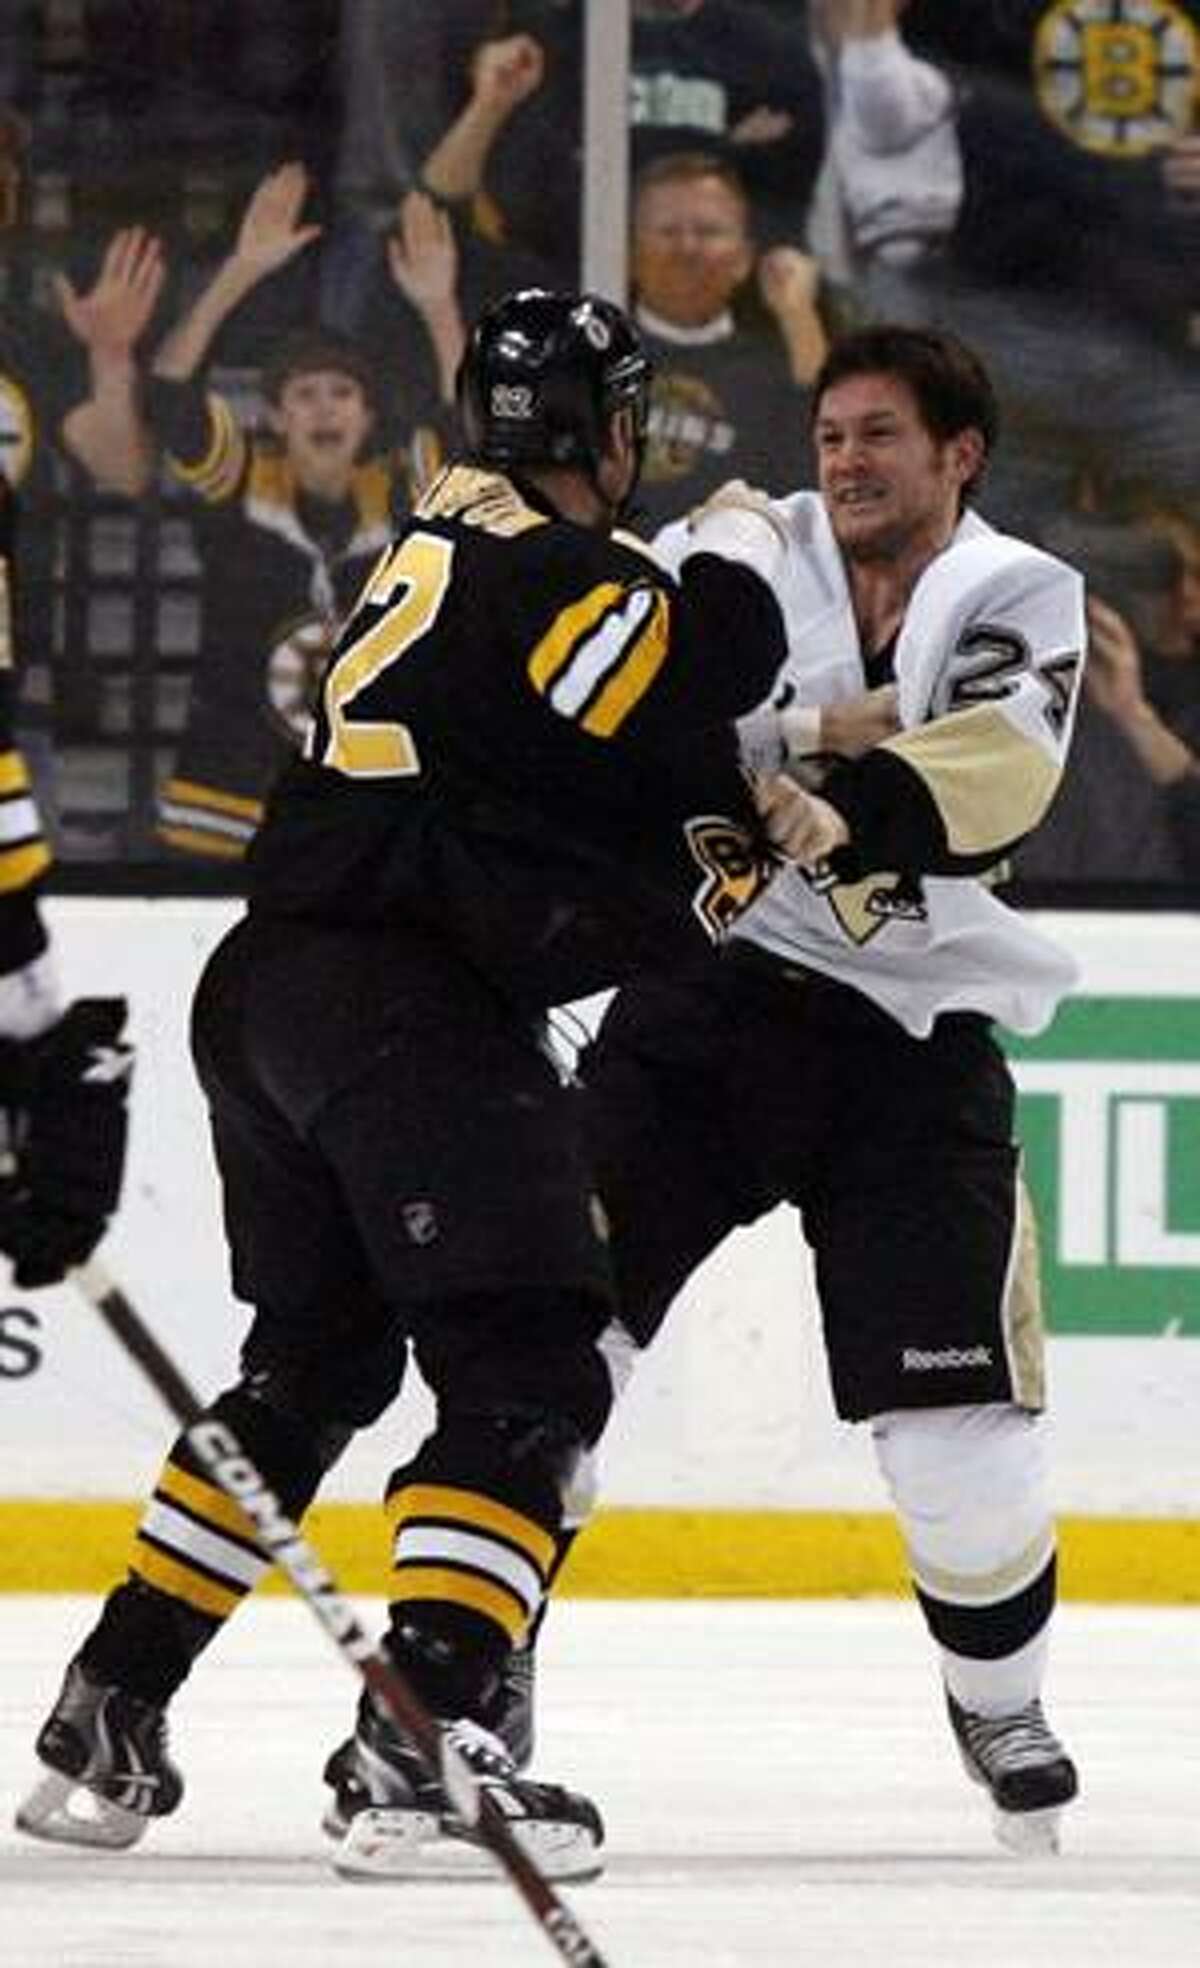 With Latest Hit, Penguins' Matt Cooke Further Injures His Image